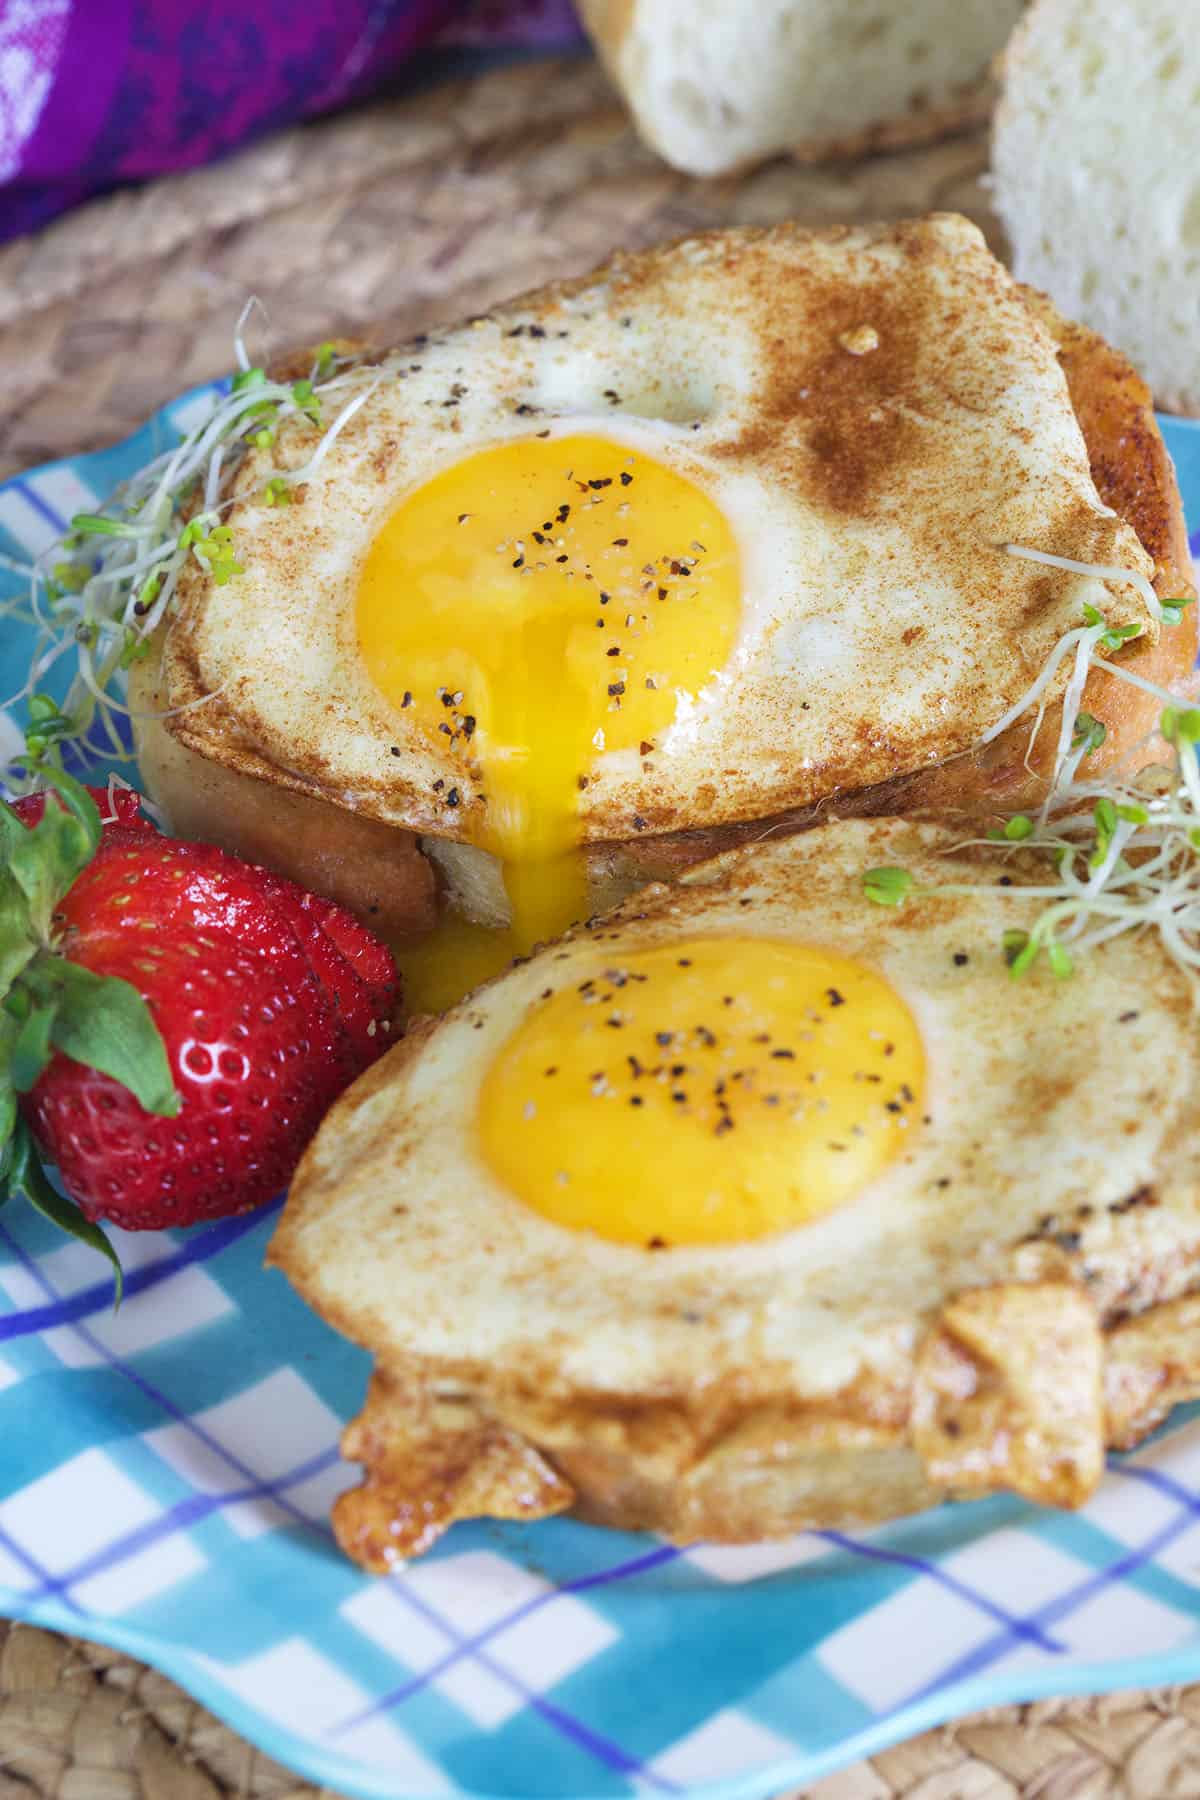 Two basted eggs on toast are presented on a white and blue plate.